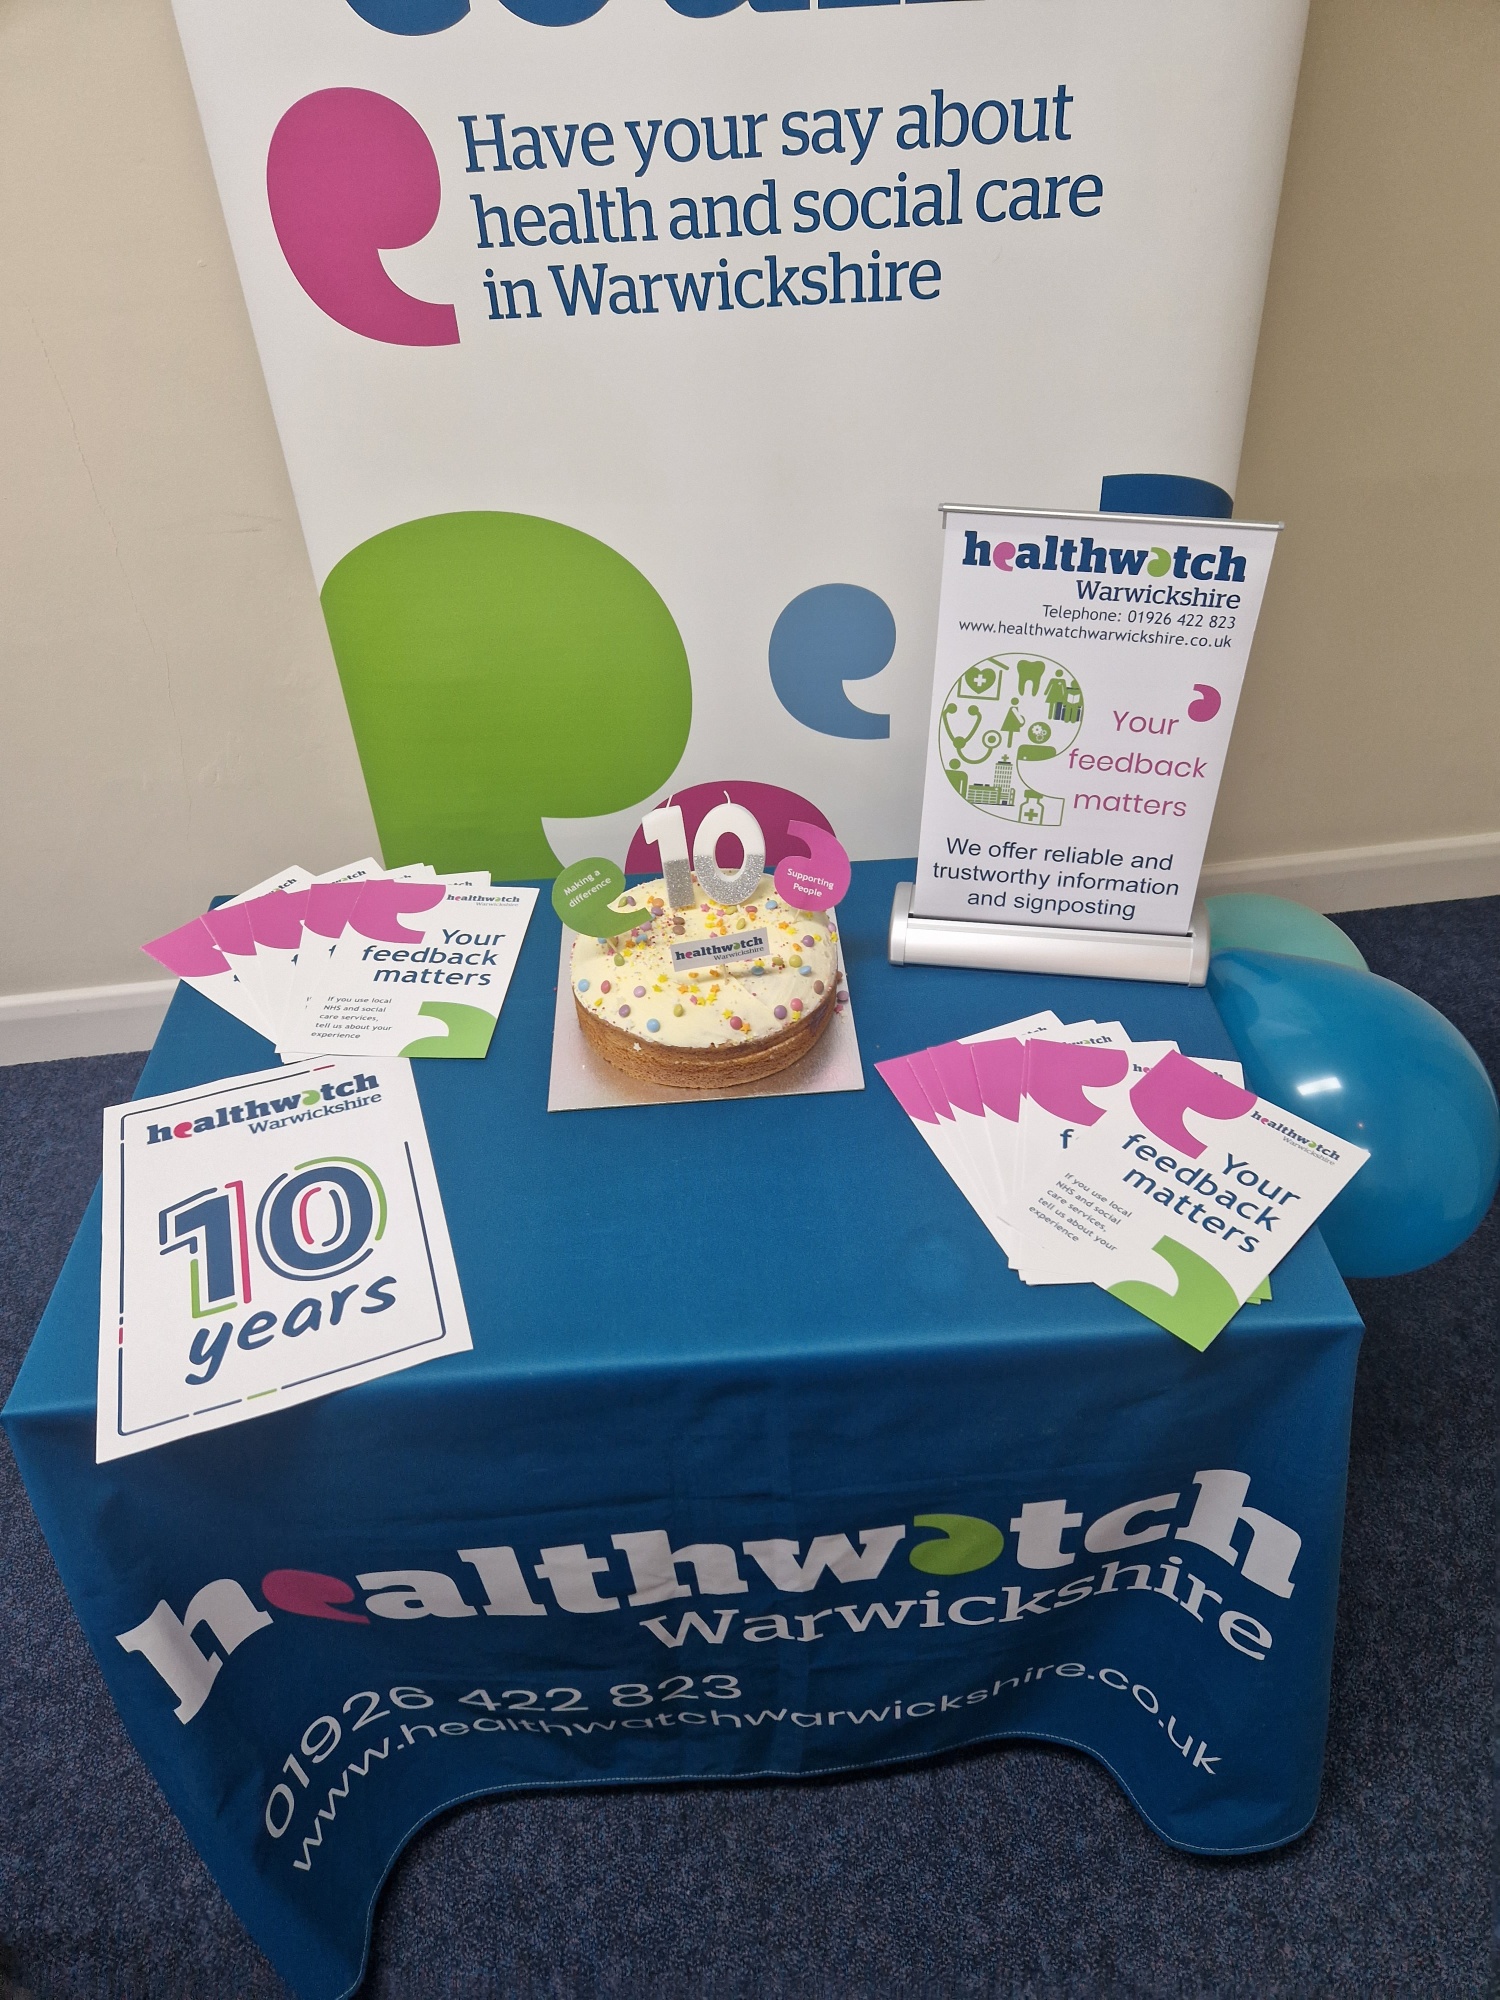 Cake to celebrate 10 years of Healthwatch